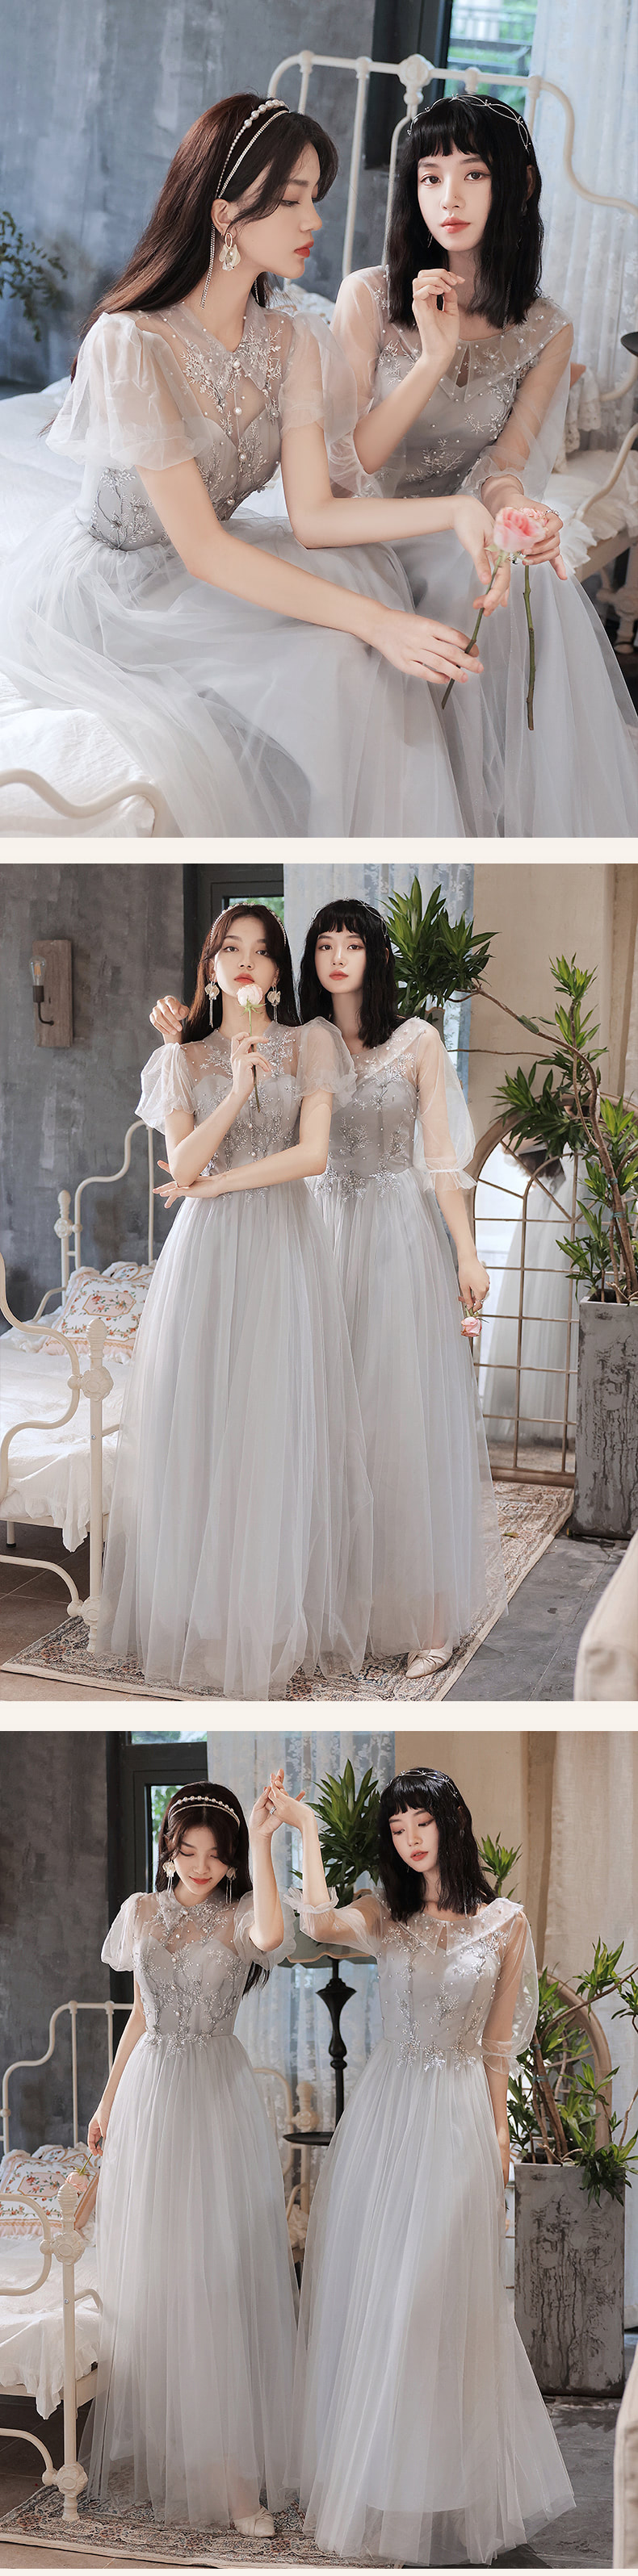 Simple-A-line-Bridal-Party-Gown-Gray-Bridesmaid-Maxi-Dress14.jpg